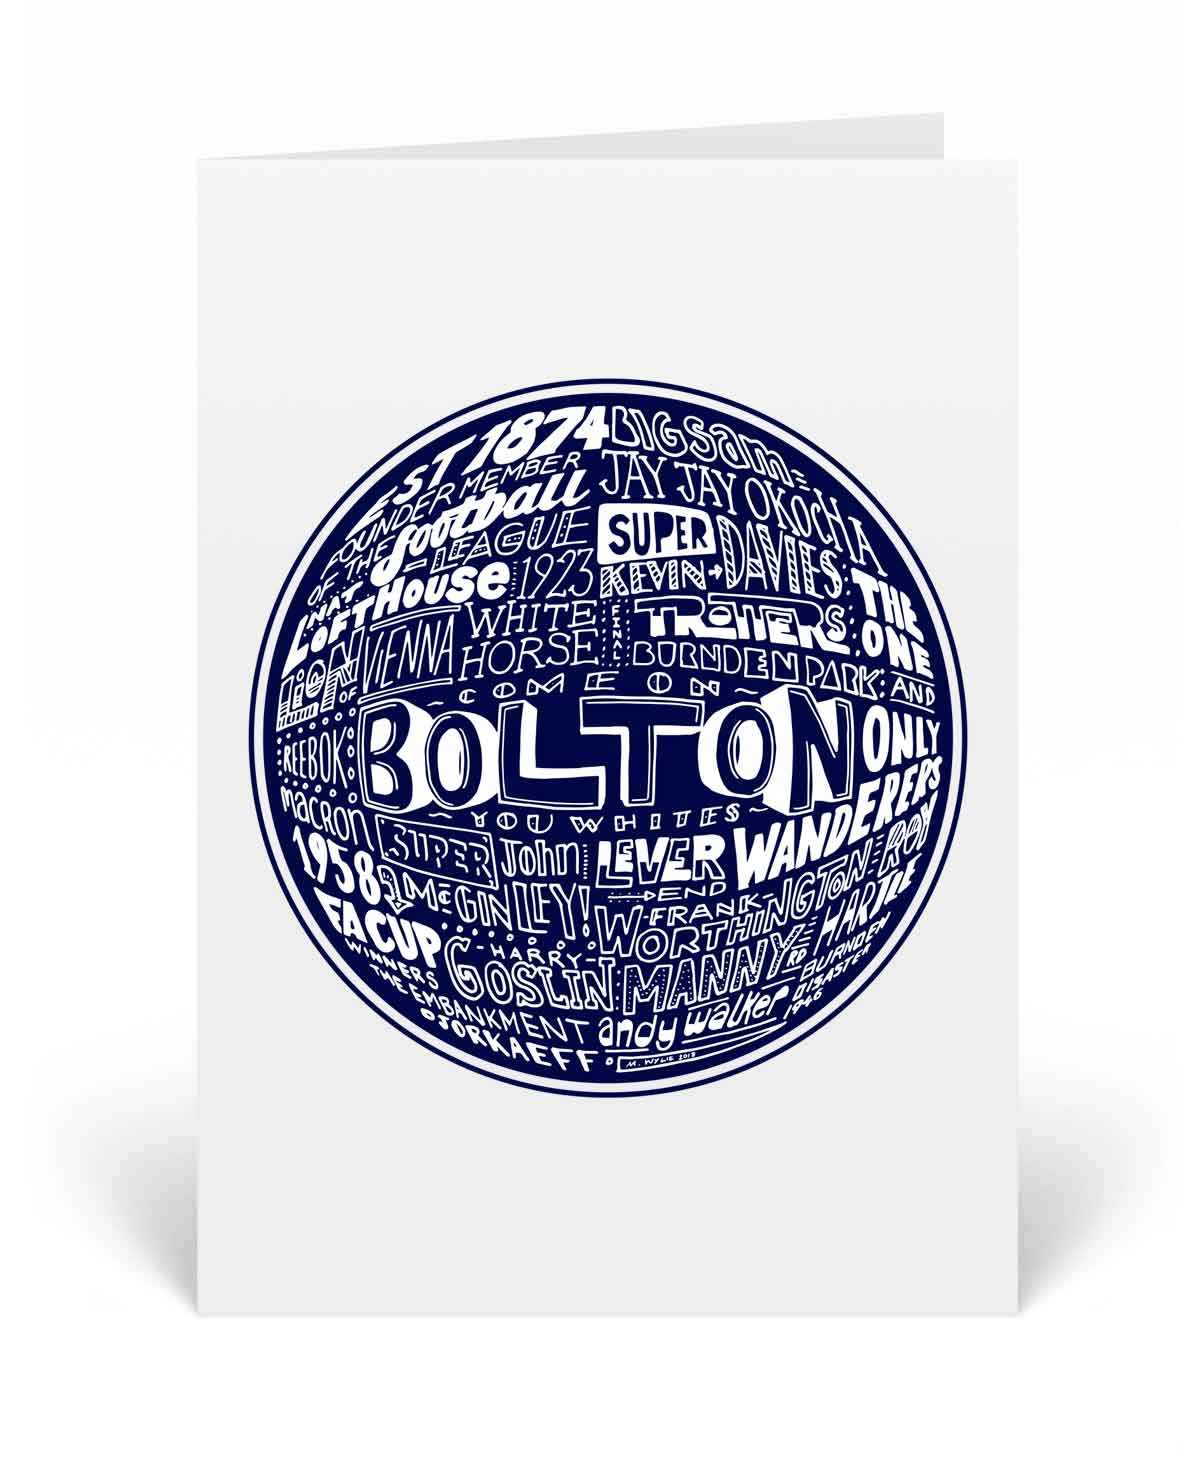 Sketch Book - Bolton Wanderers Card